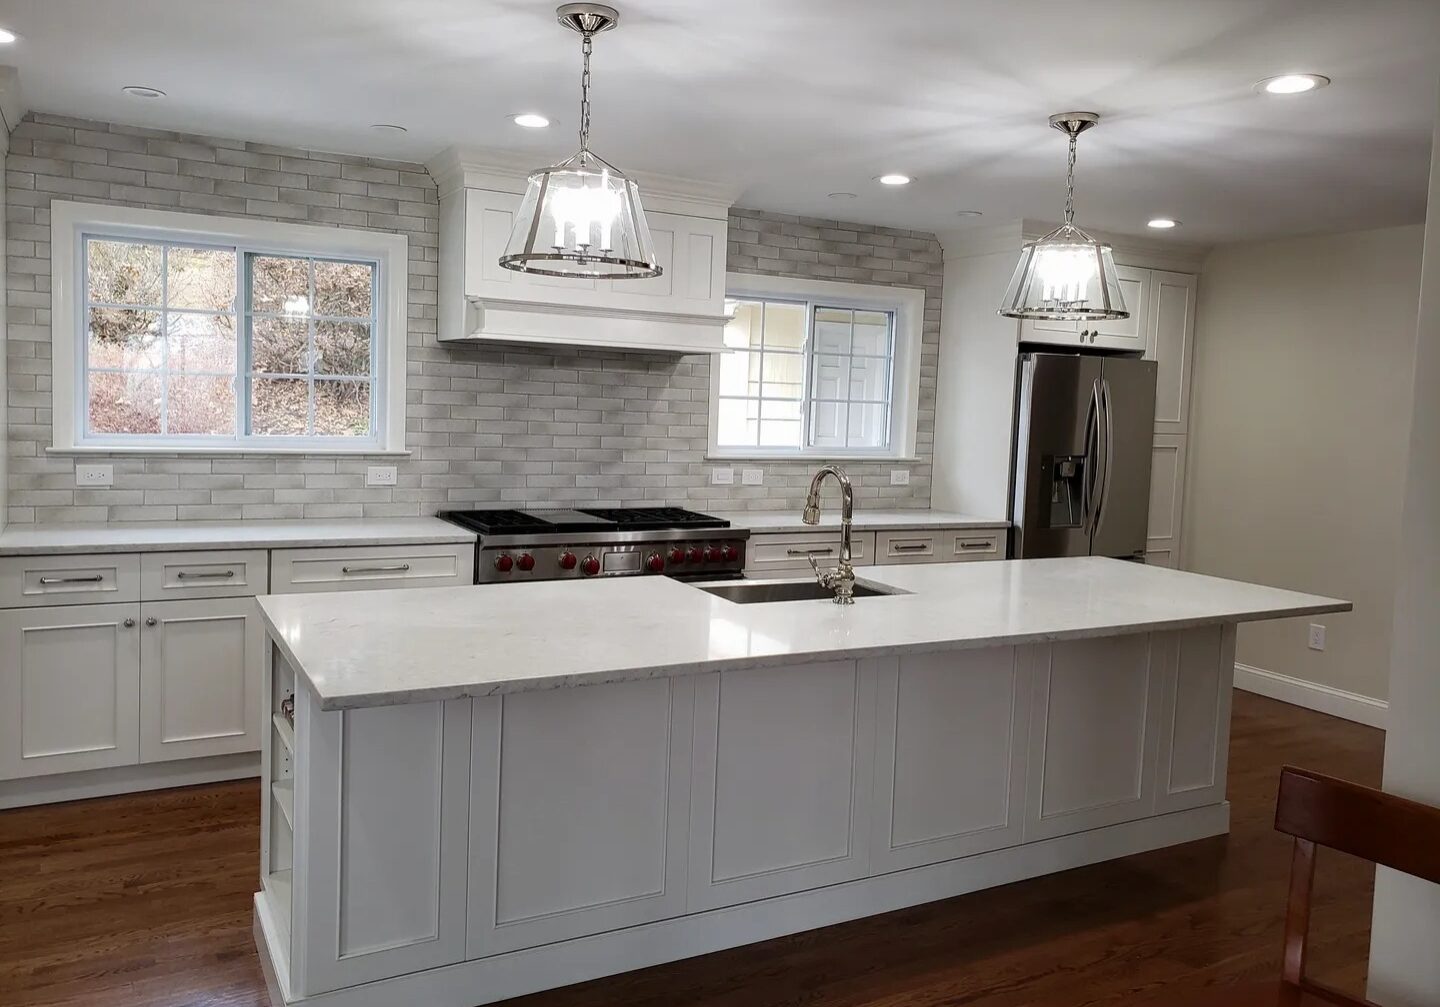 Counter island in a kitchen with white cabinets and wooden flooring